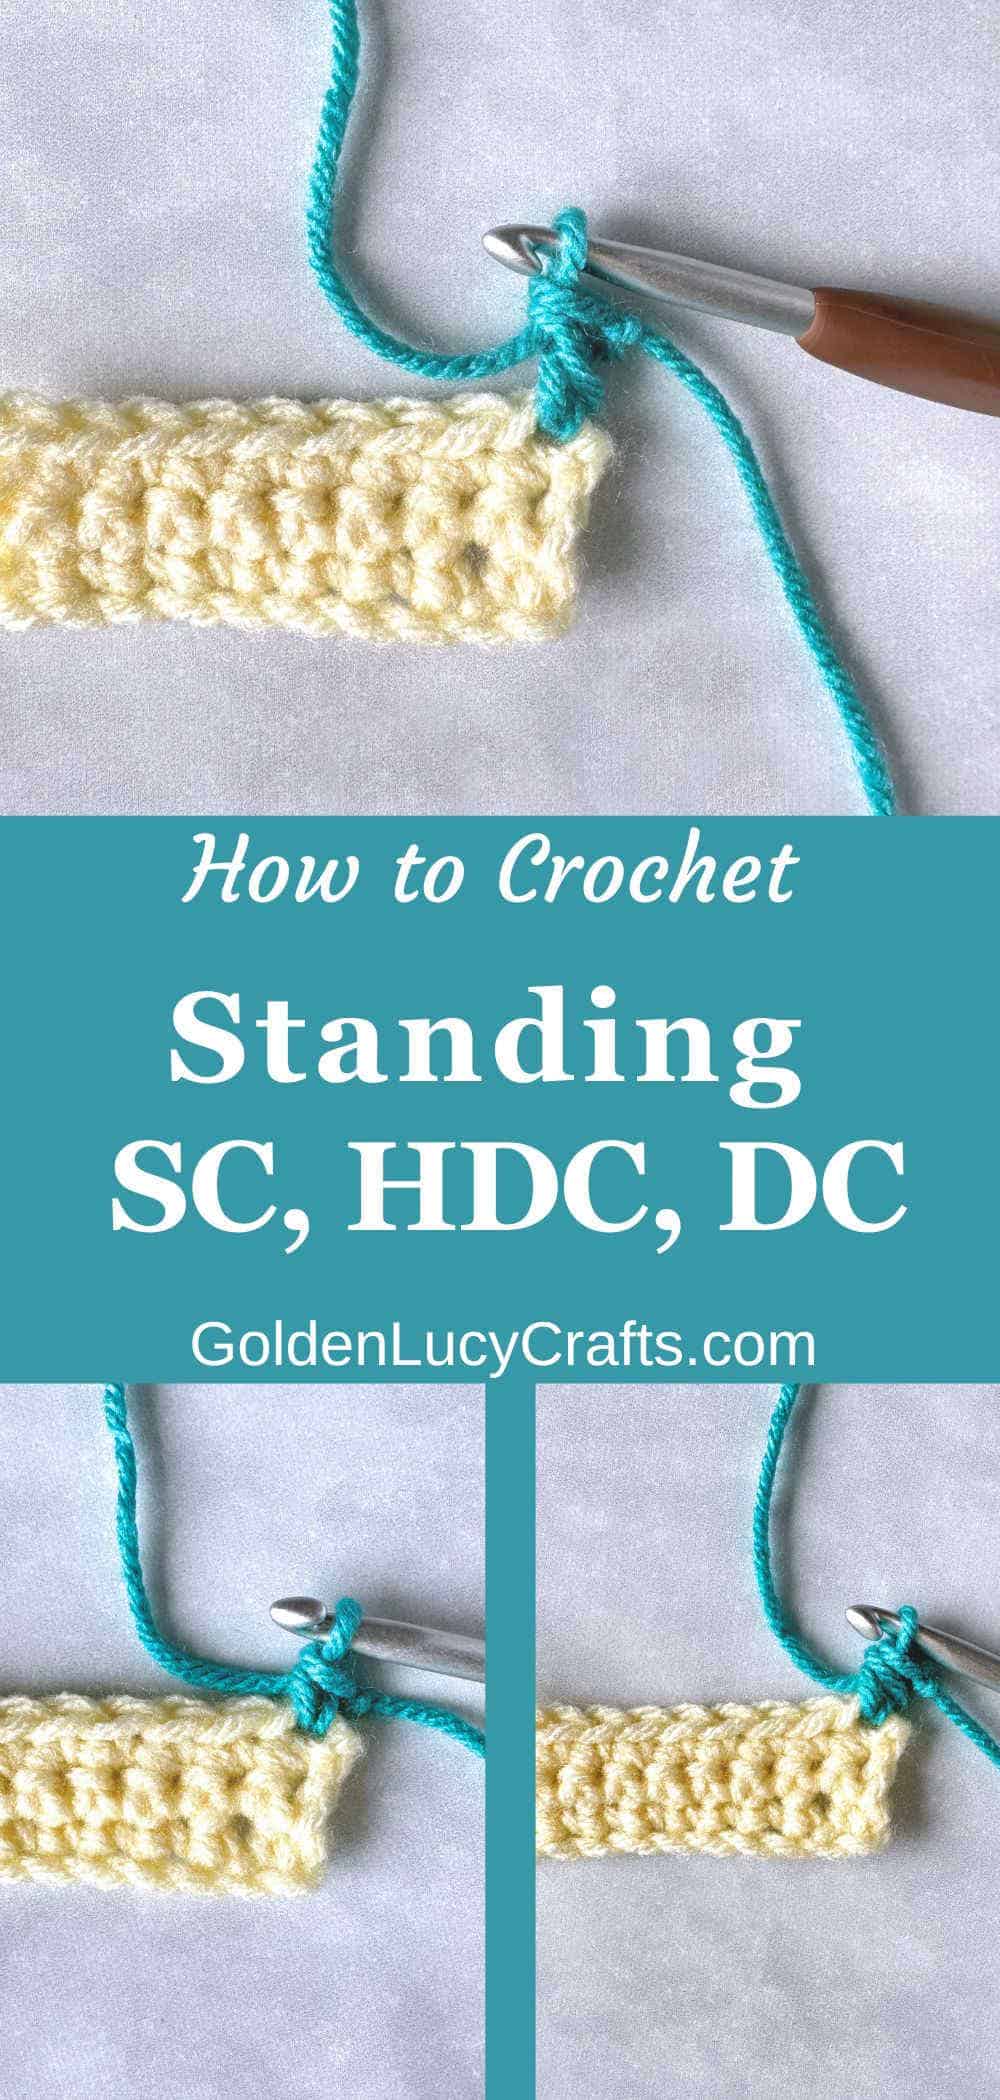 Images of crocheted standing stitches single crochet, half double crochet and double crochet.